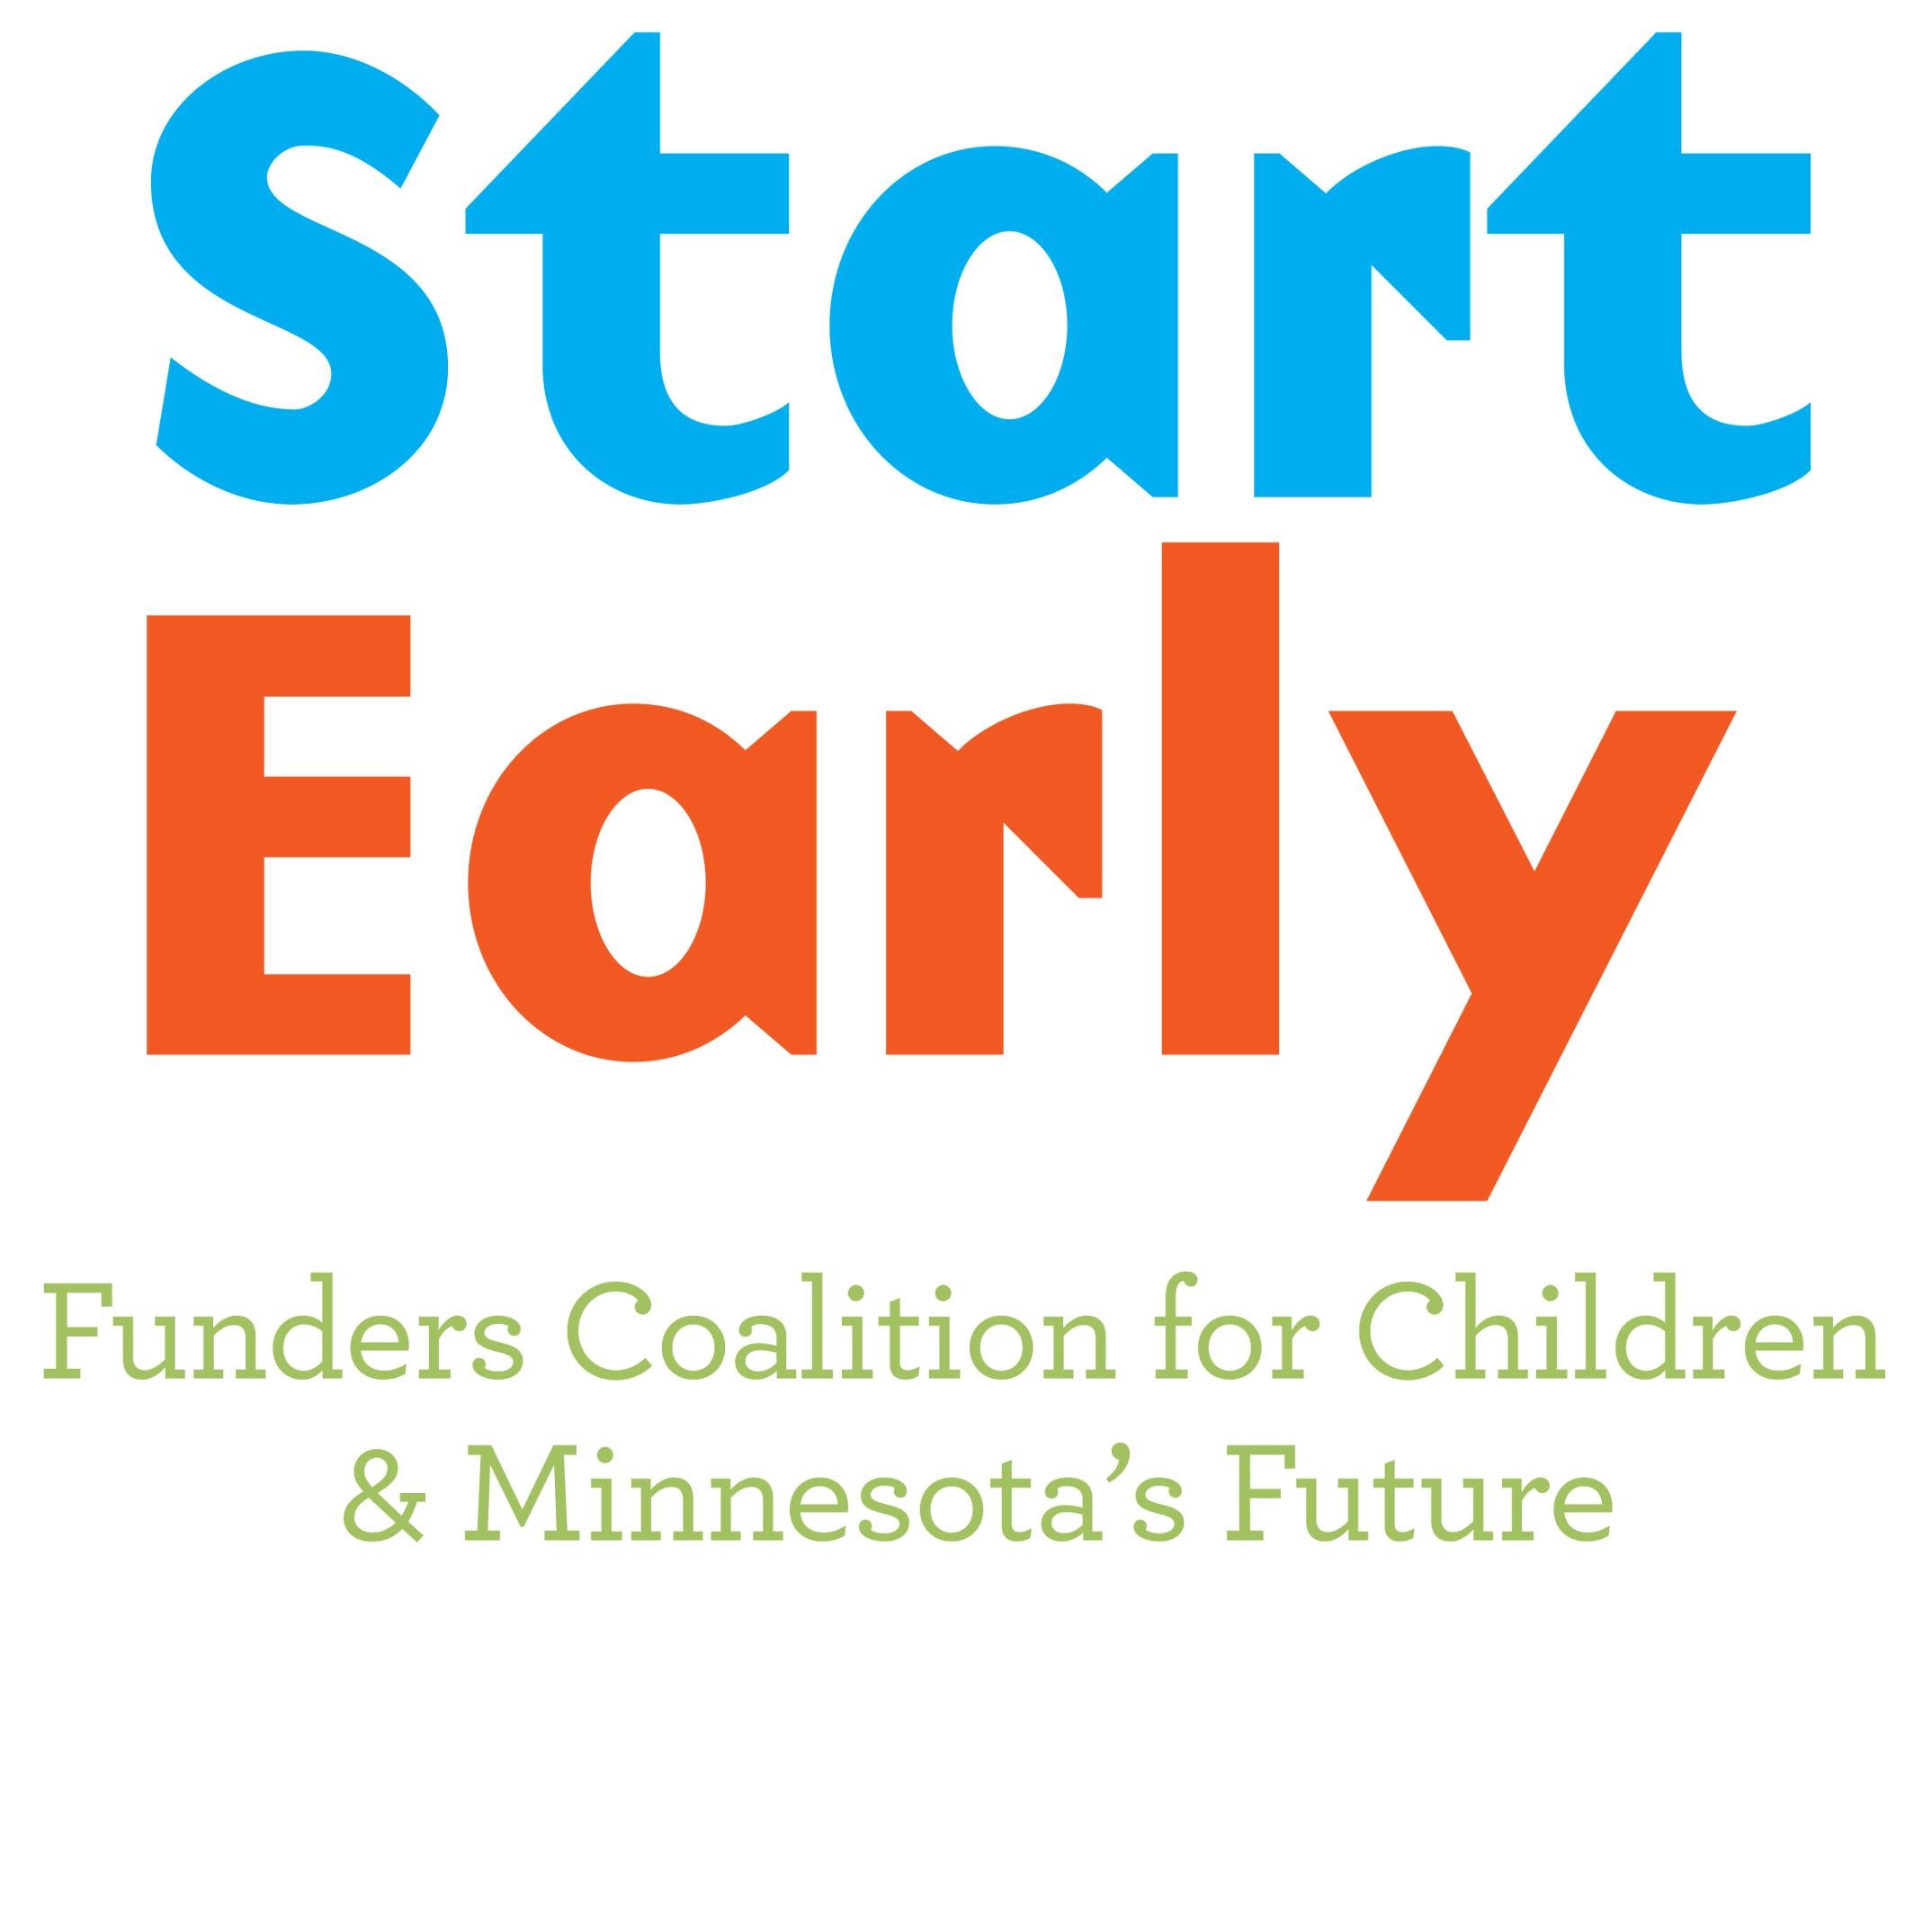 Start Early's goal is to ensure every child in Minnesota is physically, socially, emotionally and cognitively prepared for school and lifelong success.